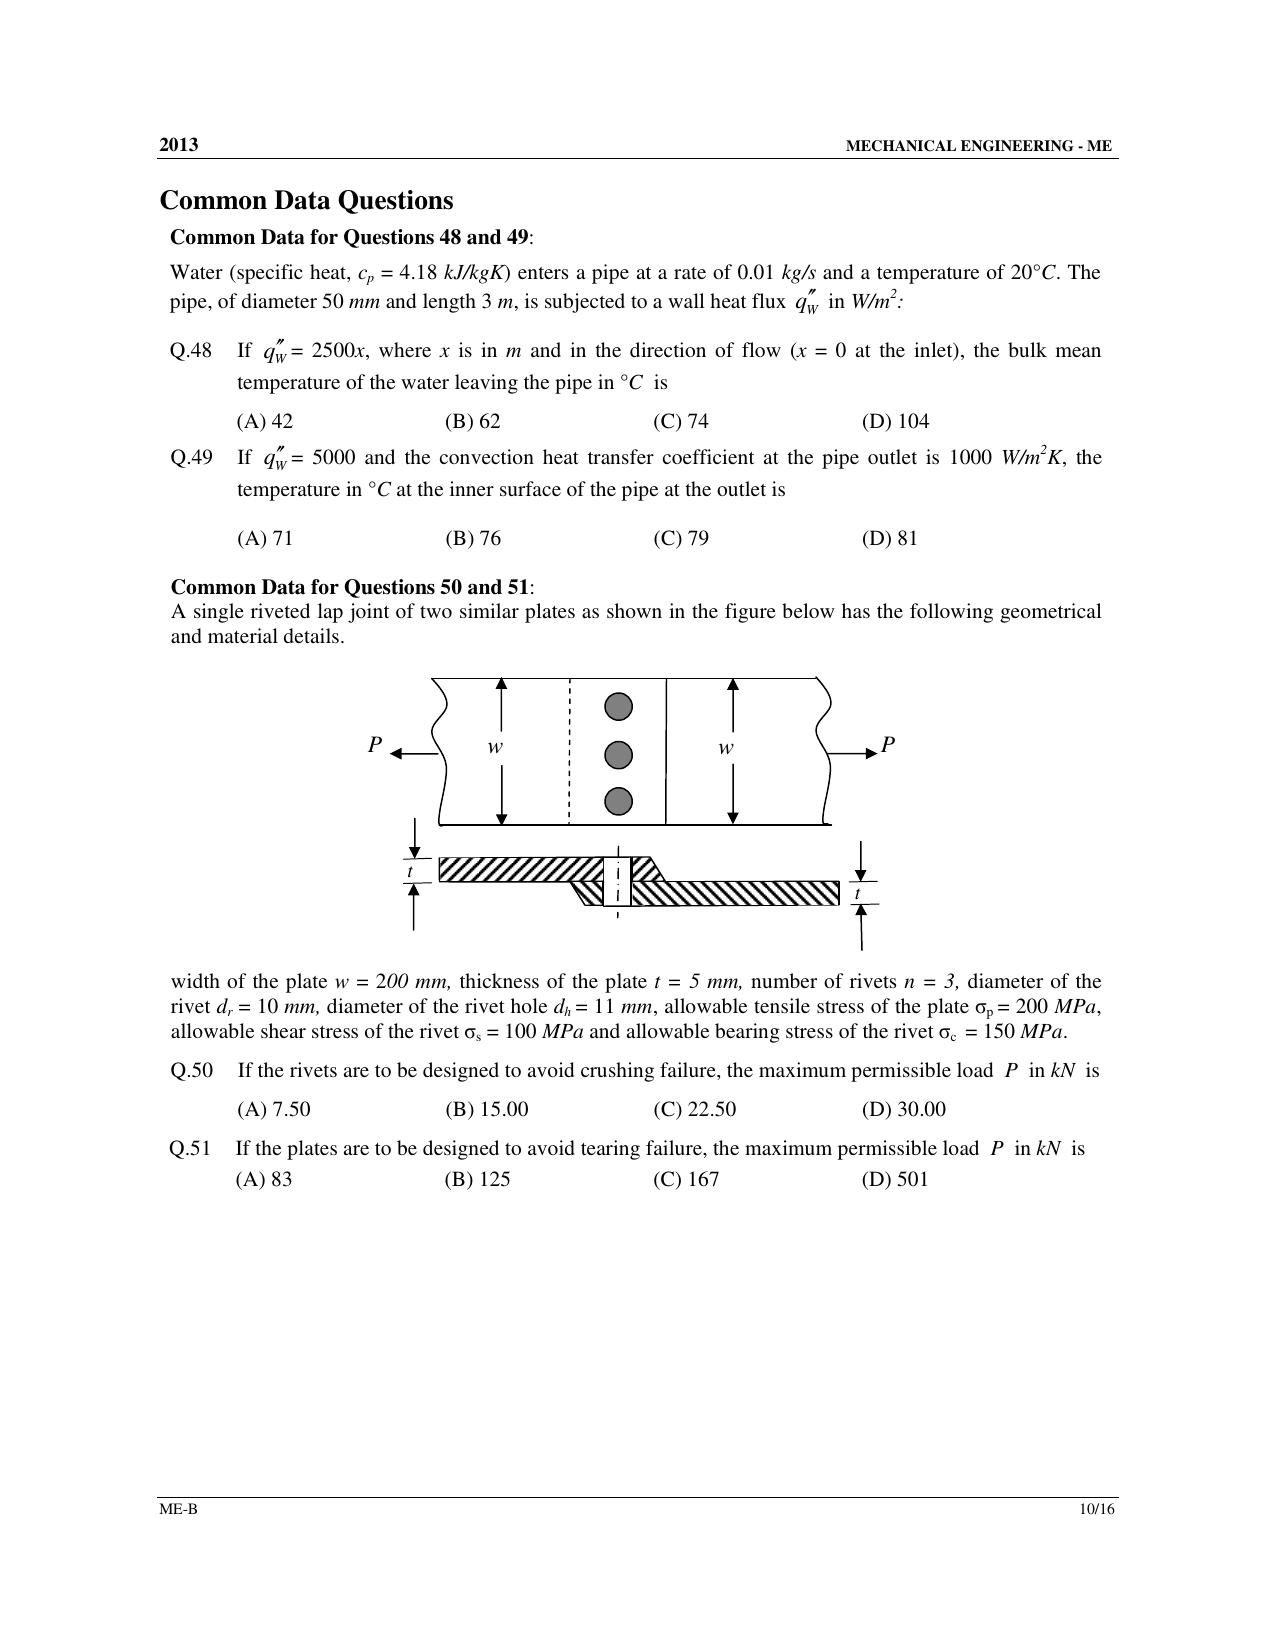 GATE 2013 Mechanical Engineering (ME) Question Paper with Answer Key - Page 25